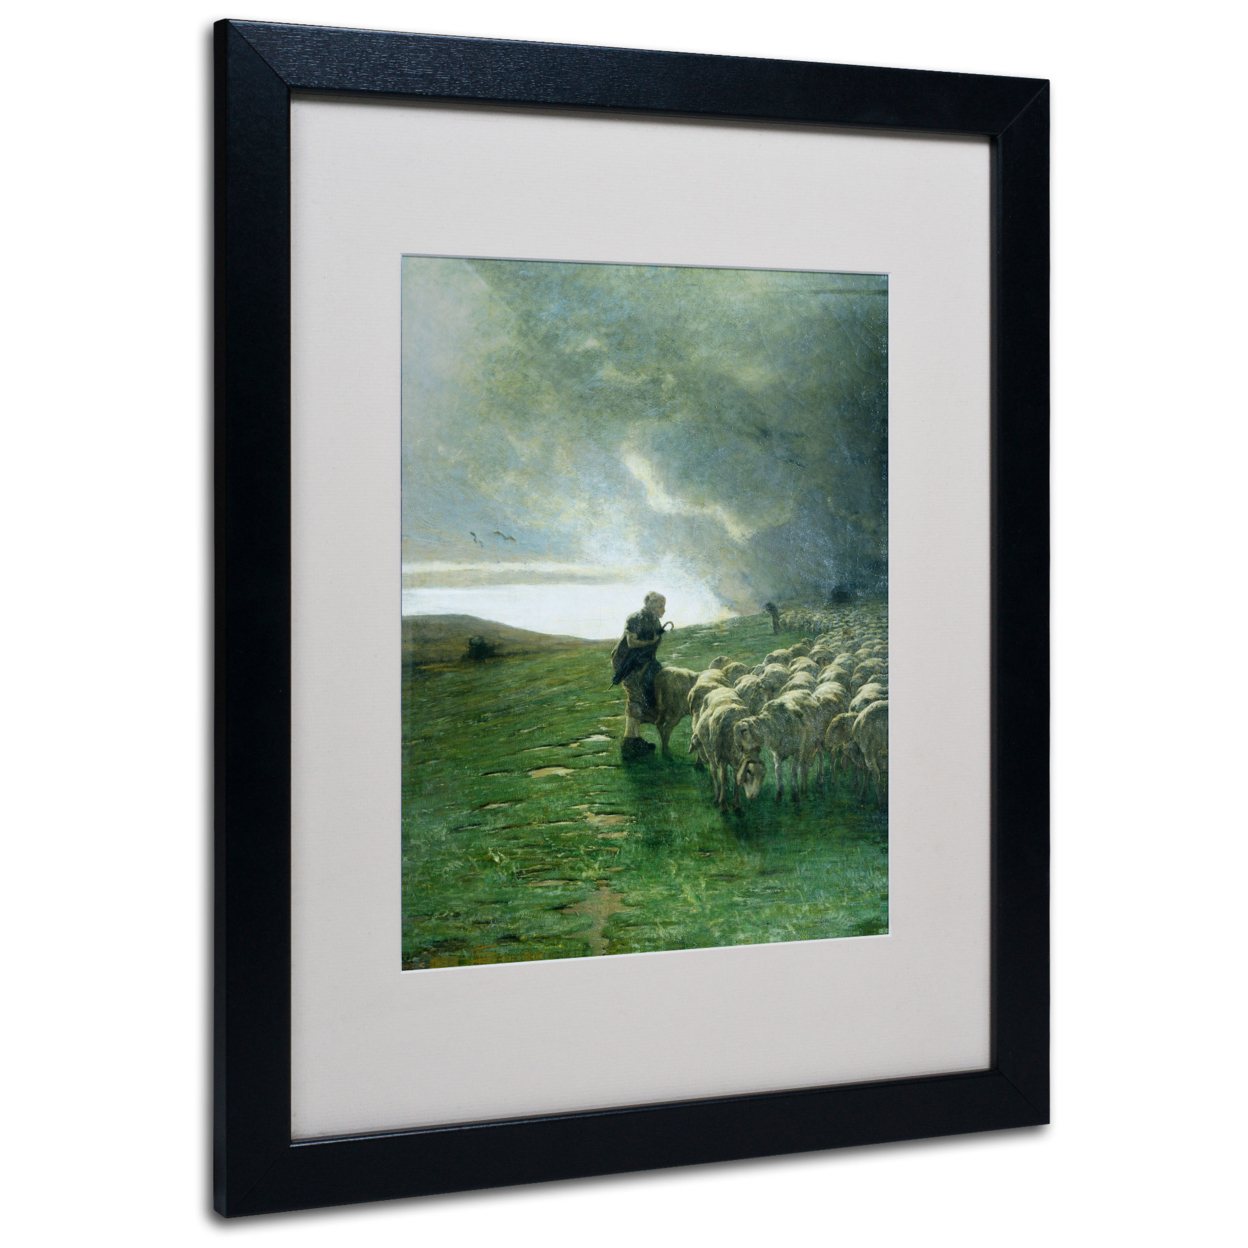 Giovanni Segantini 'After Storm' Black Wooden Framed Art 18 X 22 Inches